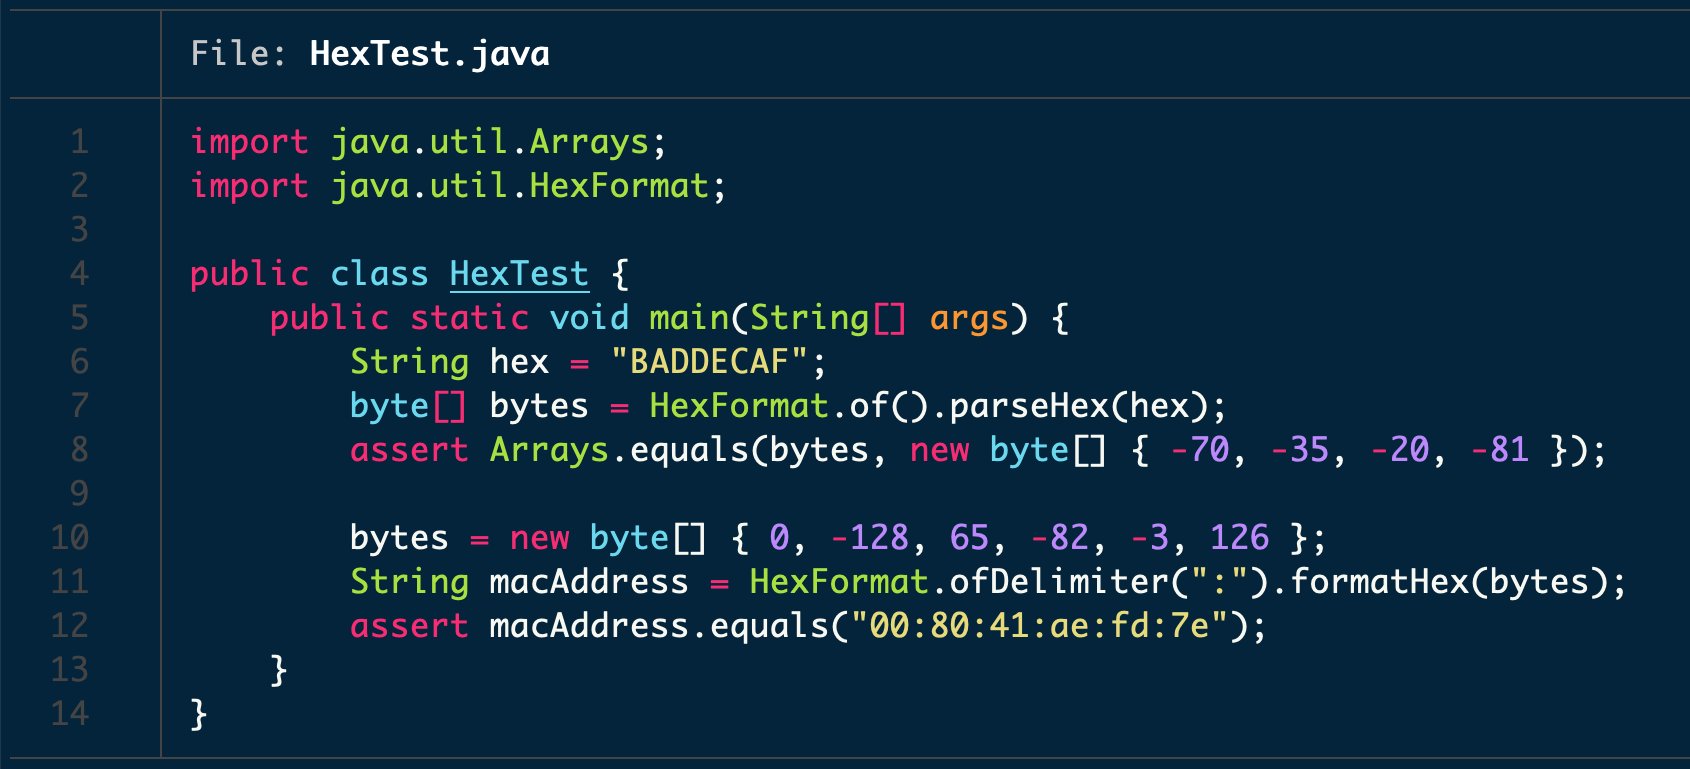 Gunnar Morling 🌍 on Twitter: "A very sweet API addition that's coming with @java 17: java.util.HexFormat. No any longer for custom implementations, or pulling in JAXB's DatatypeConverter. Nice 🎉! https://t.co/7tX8UUmmGt https://t.co/seKO8361a8" /